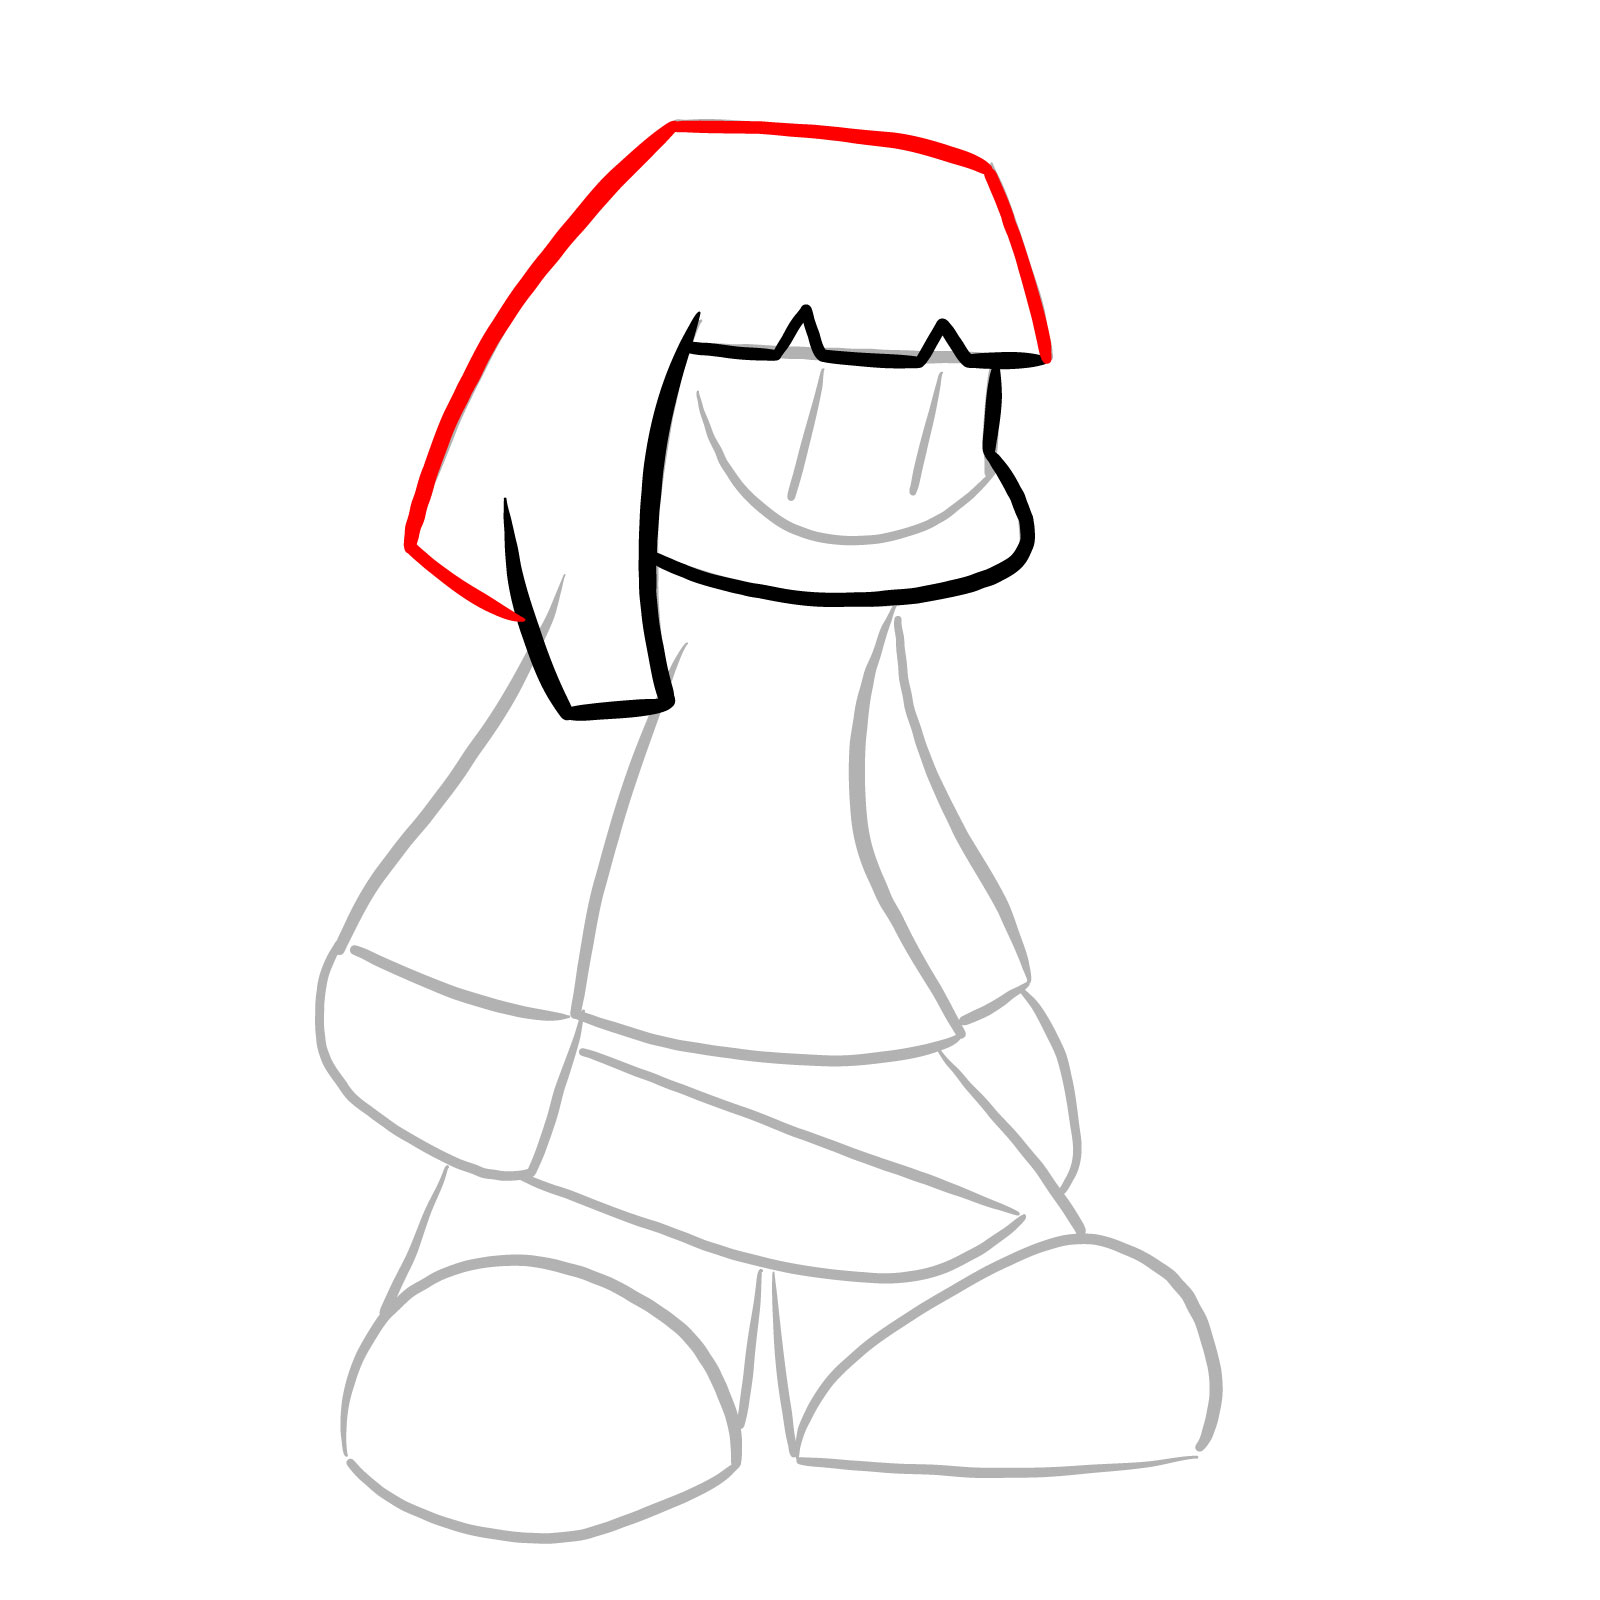 How to draw Chara from Friday Night Dustin' - step 07